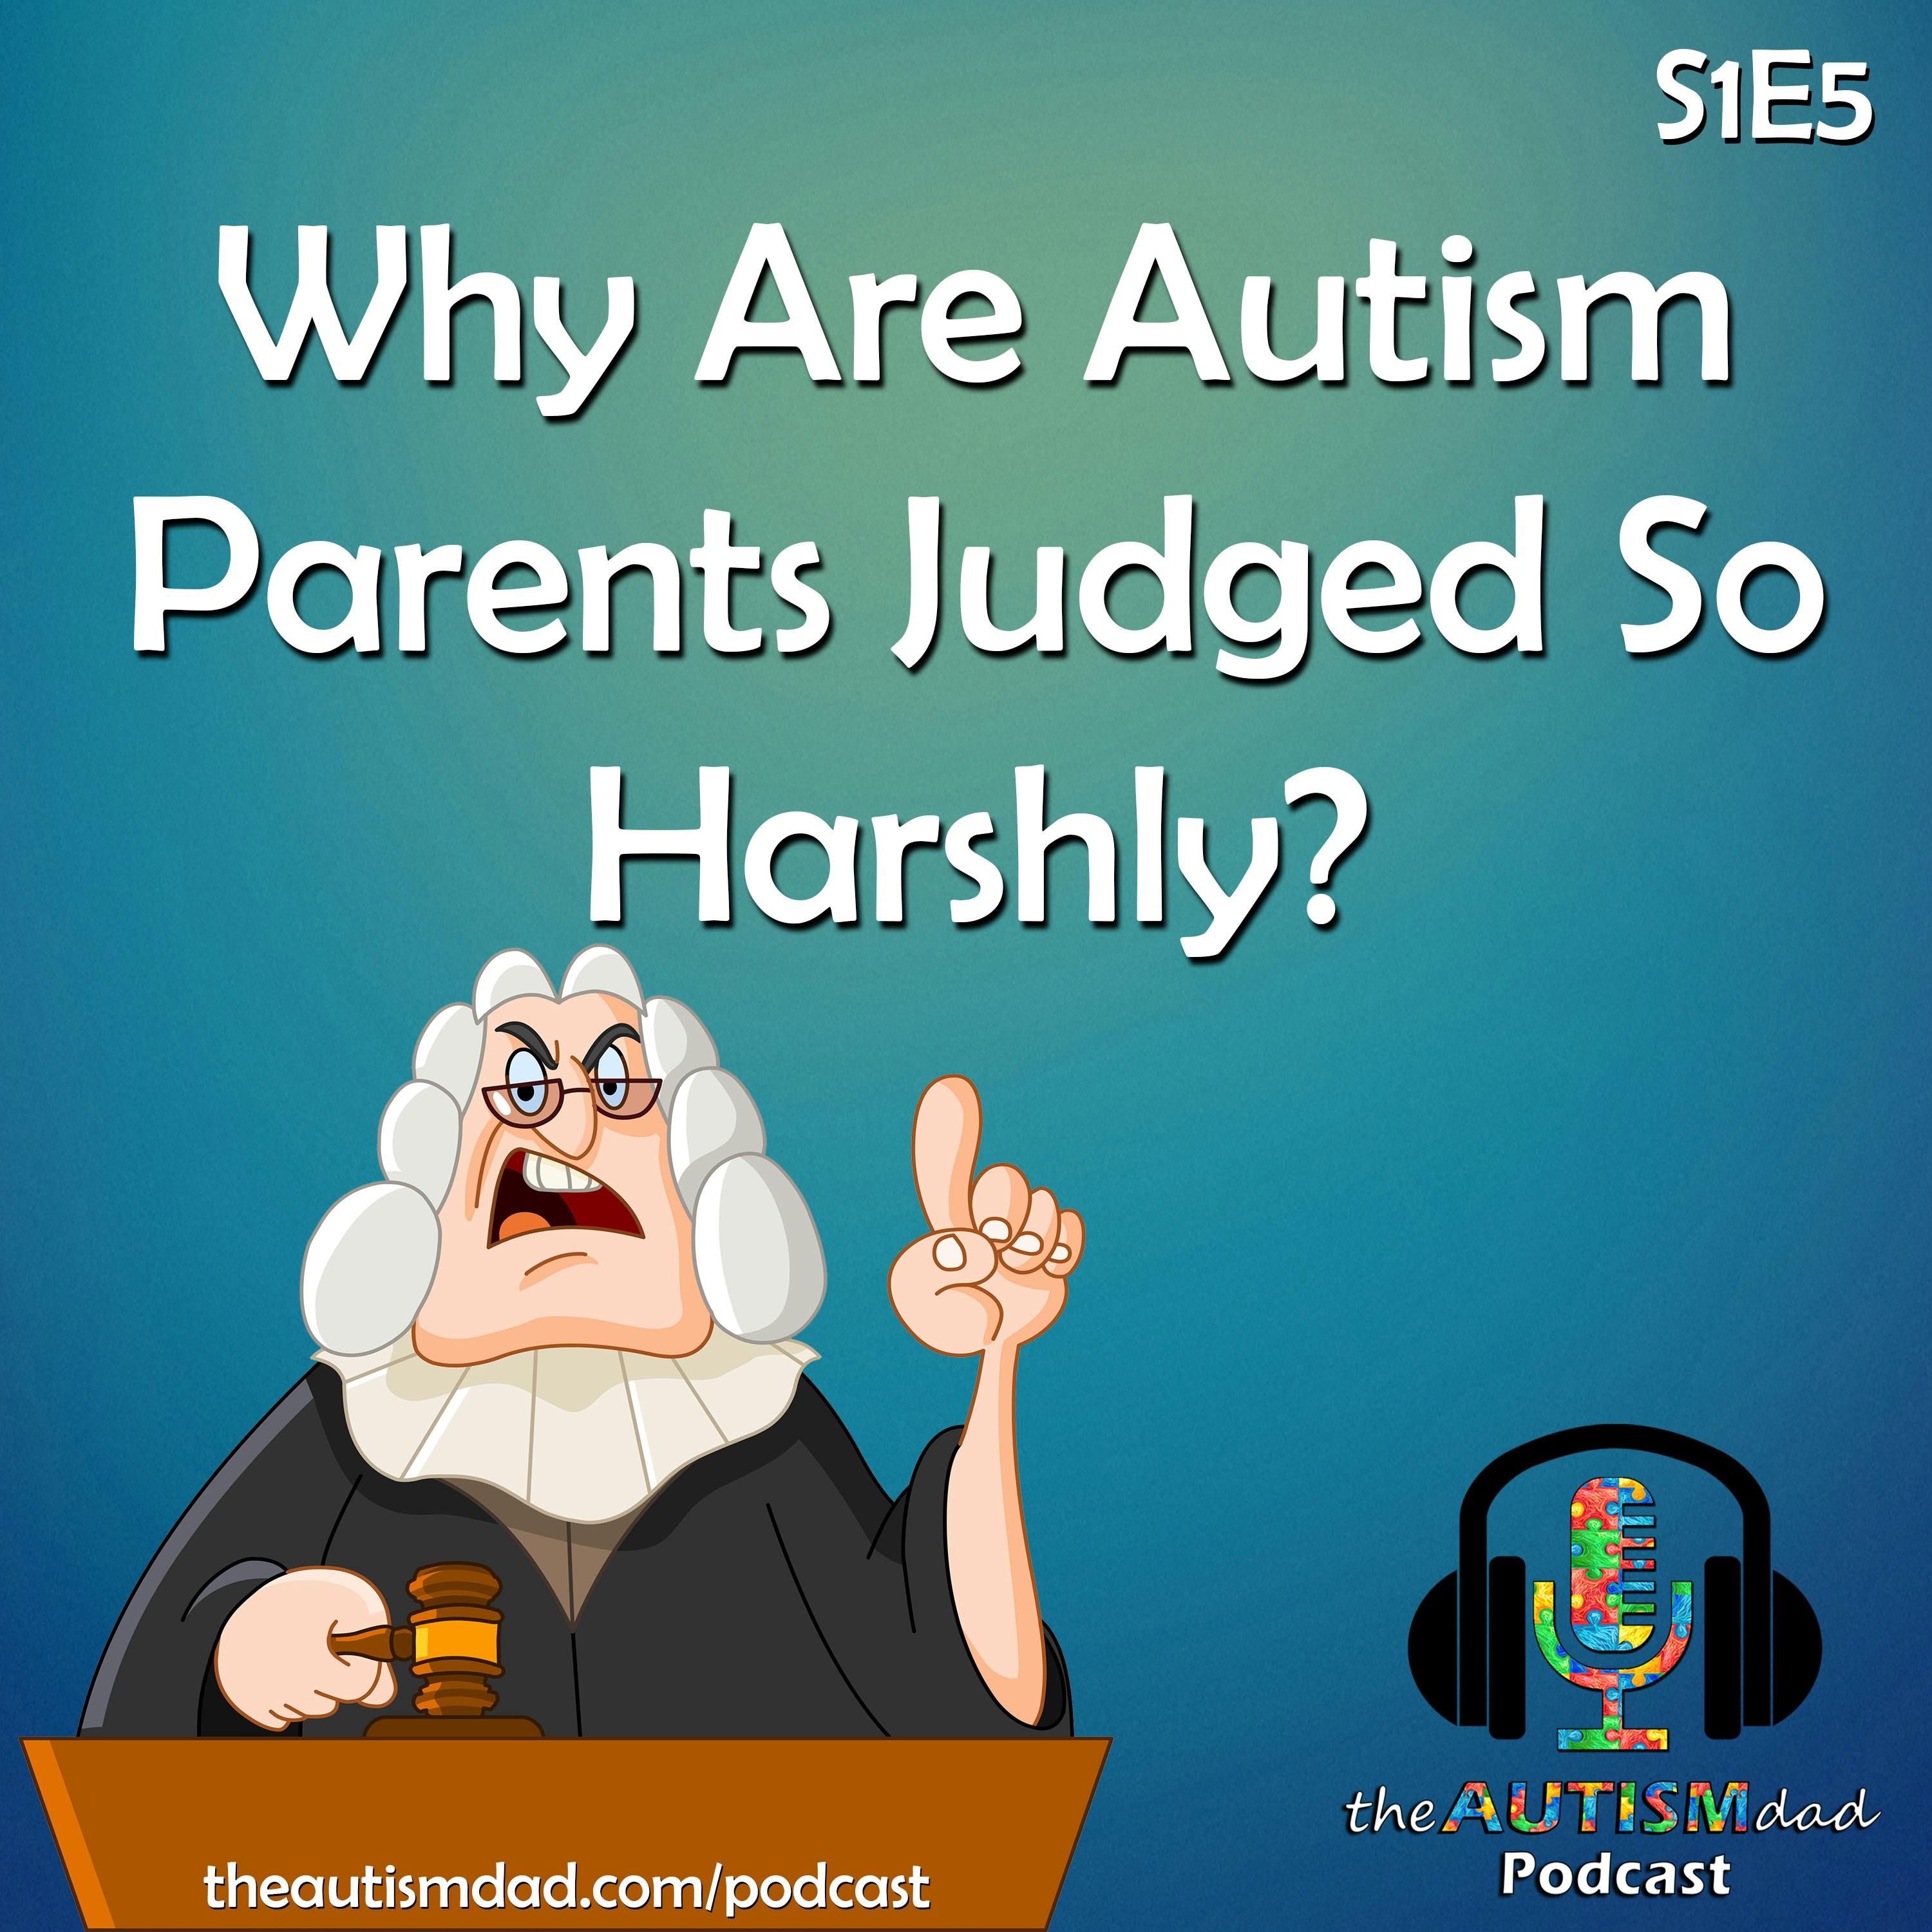 Why Are Autism Parents Judged So Harshly?